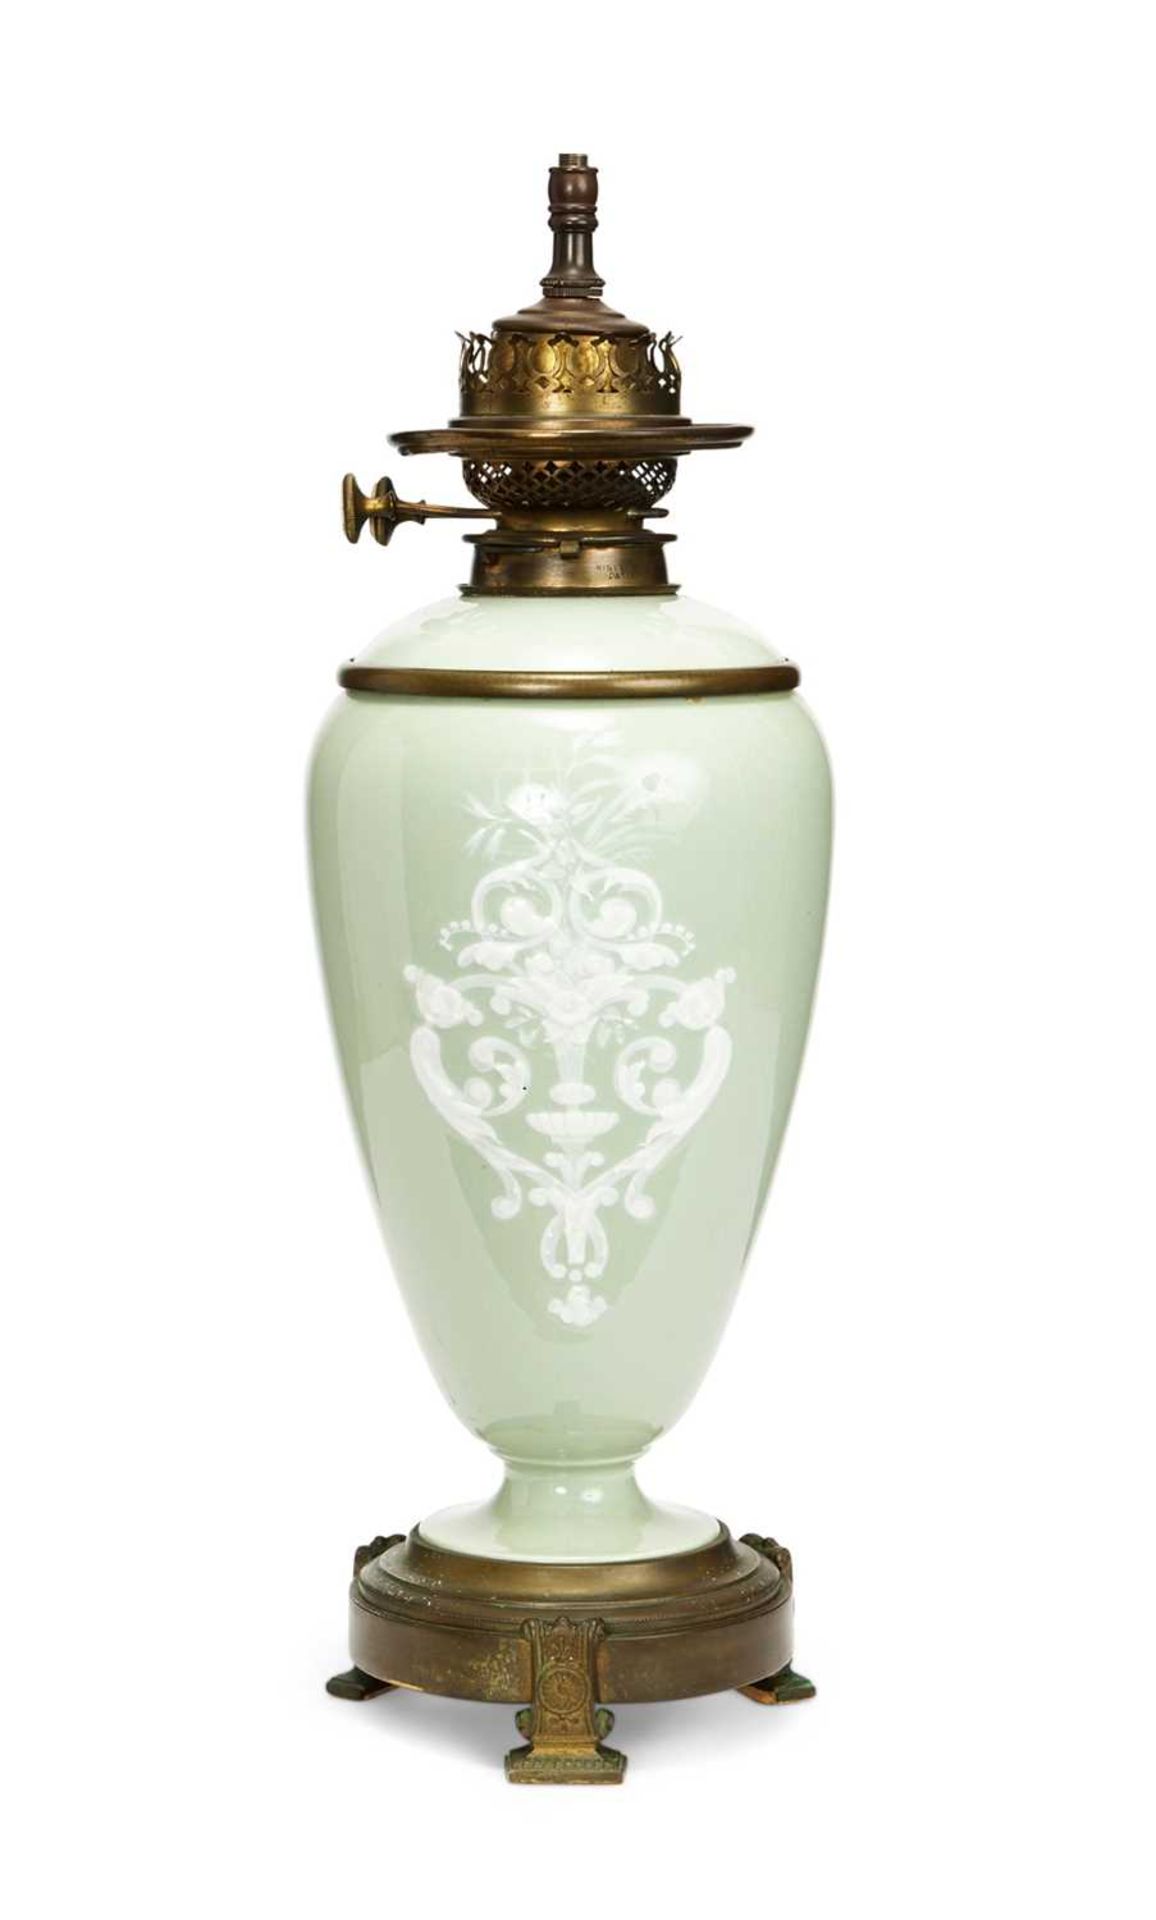 A LATE 19TH CENTURY CELADON PATE SUR PATE PORCELAIN LAMP BASE BY JAMES HINKS - Image 2 of 2